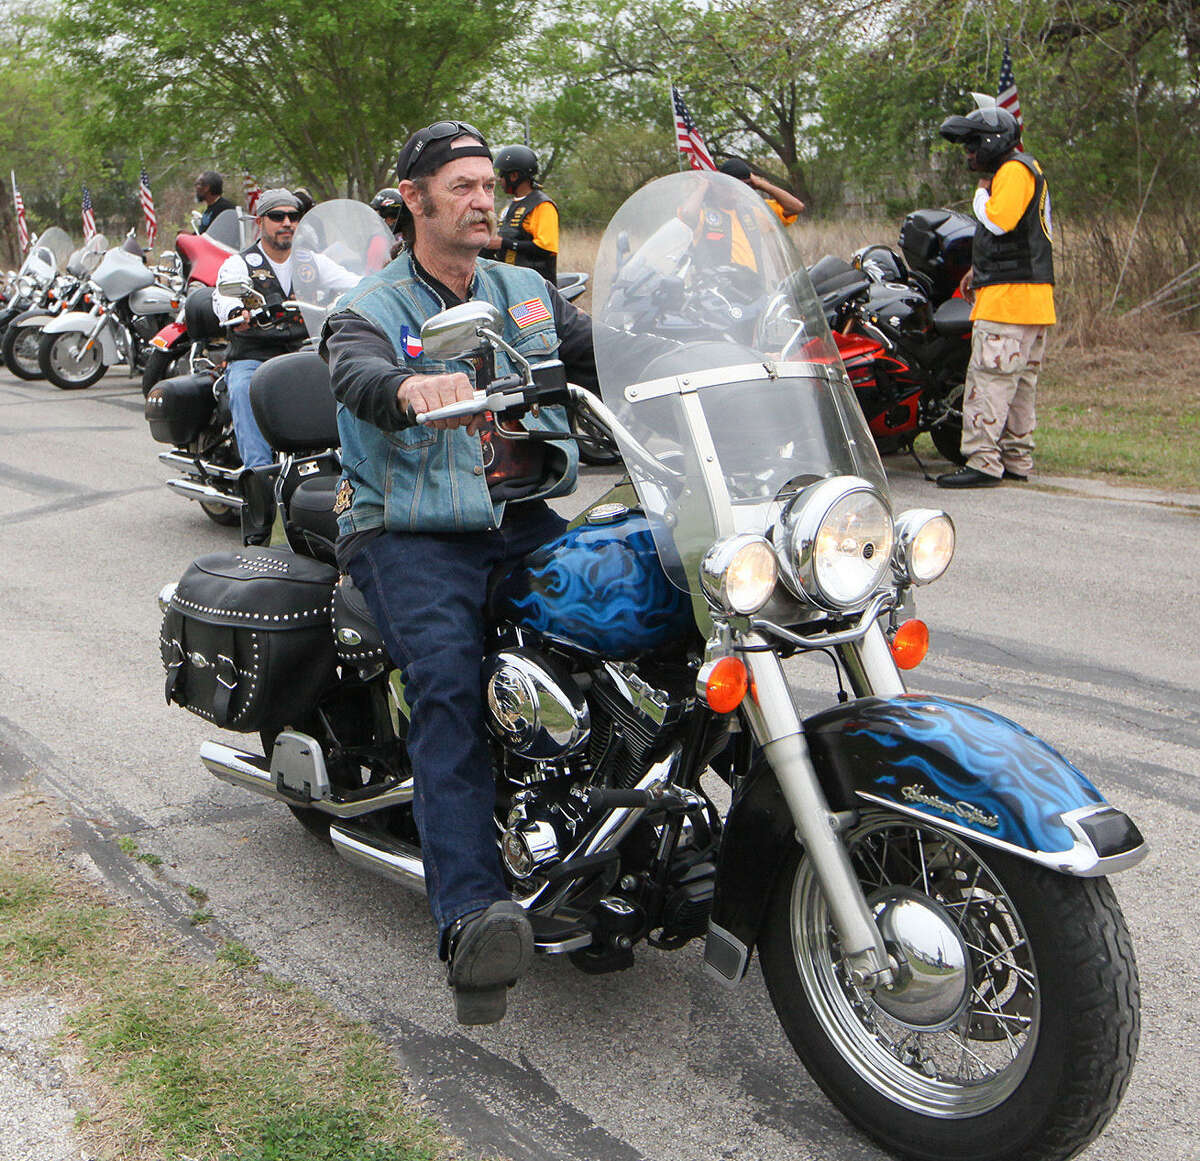 Riders take off at the start of Saturday's 10th annual Rolling Run, Converse American Legion Post 593's second largest fundraiser. Proceeds go to help veterans and their families.